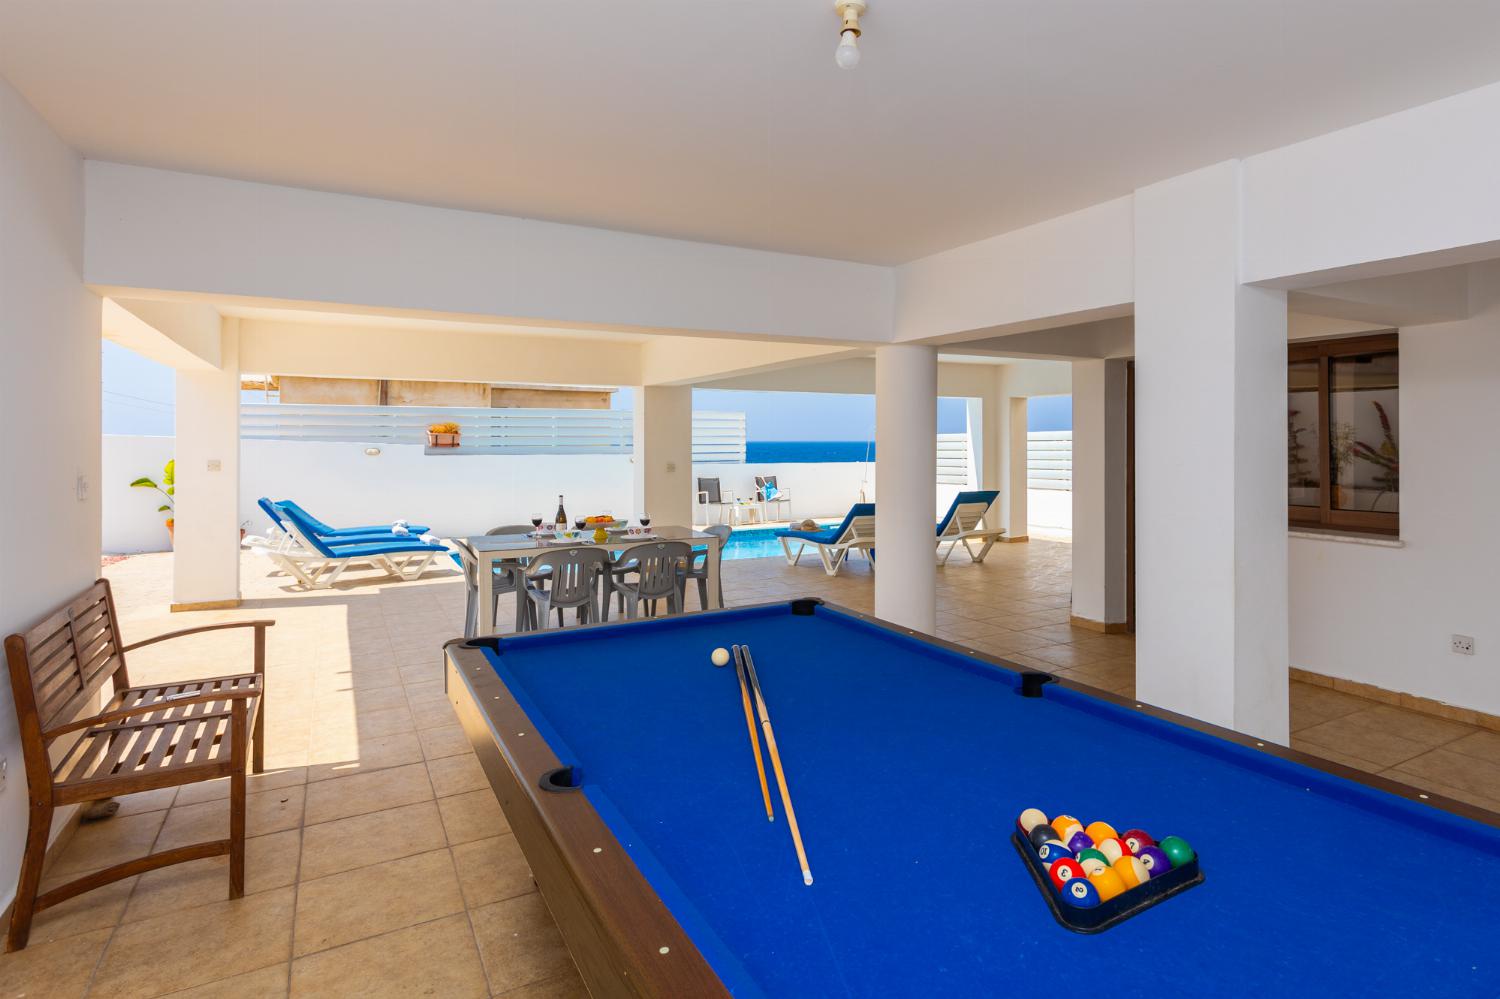 Sheltered terrace with pool table